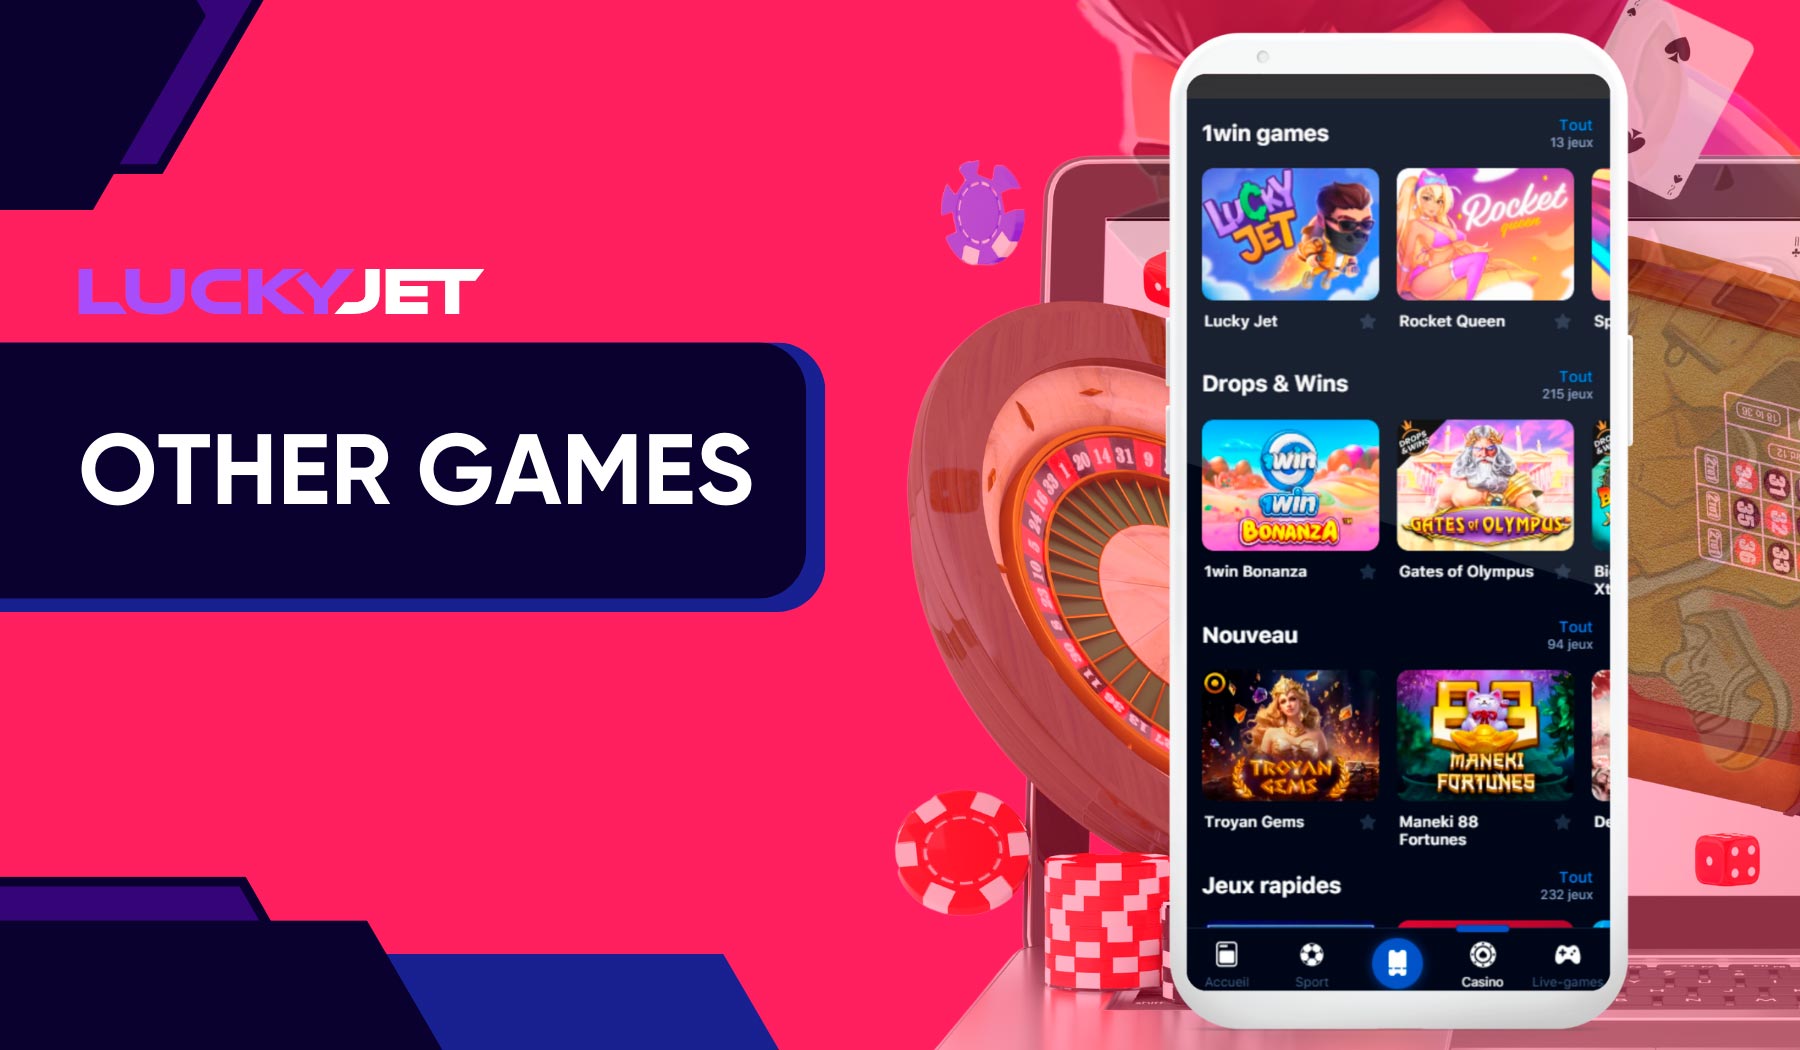 You can play other games in lucky jet app